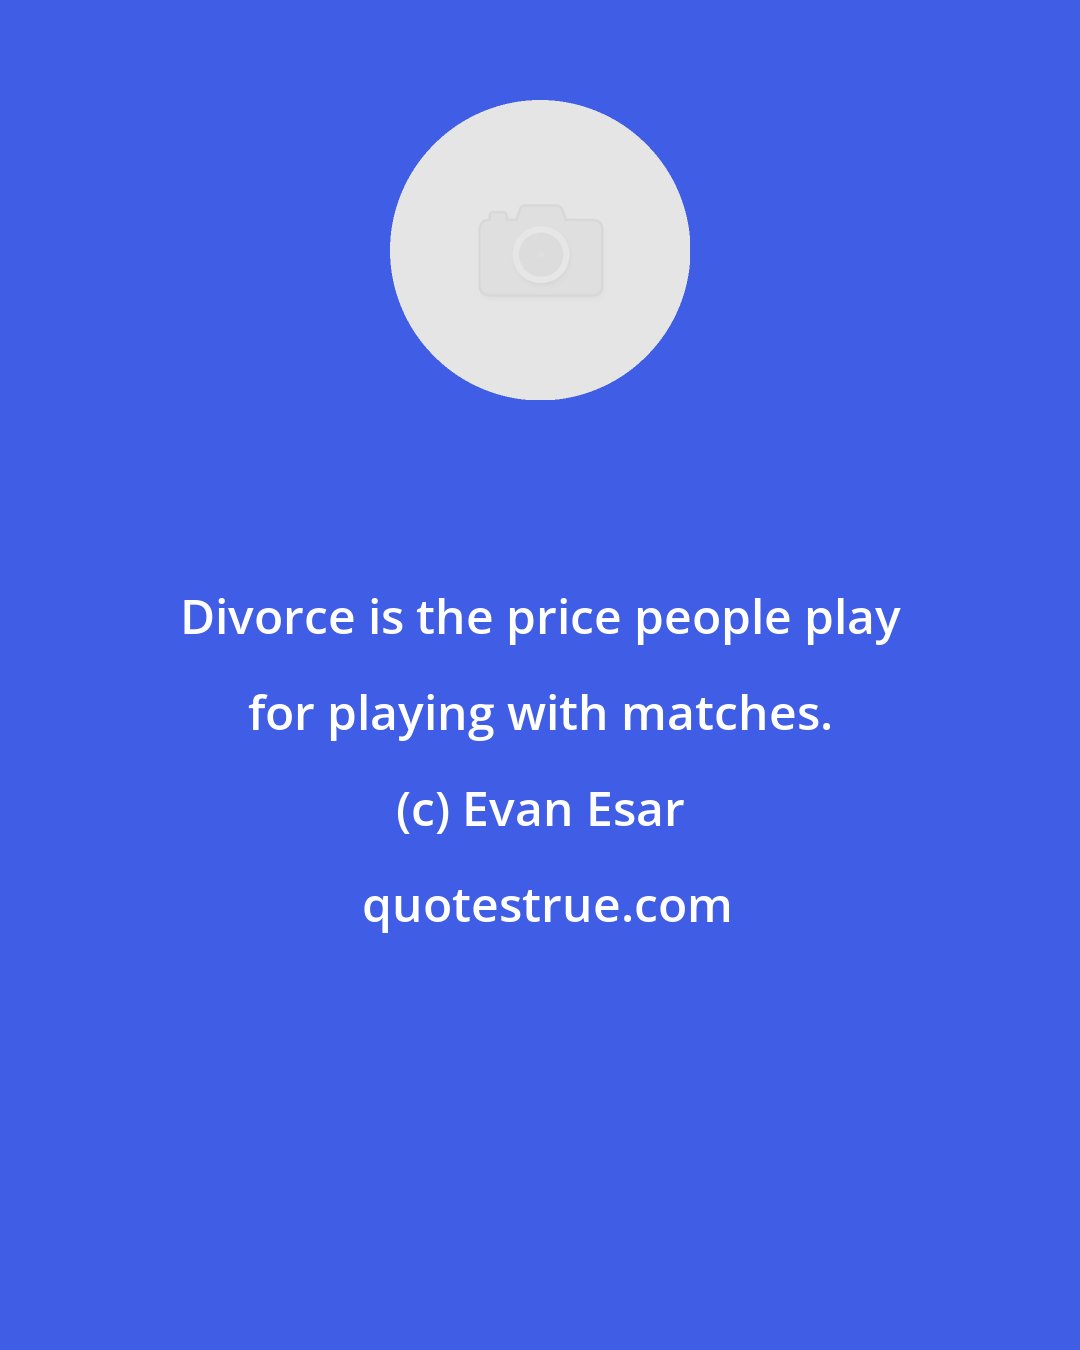 Evan Esar: Divorce is the price people play for playing with matches.